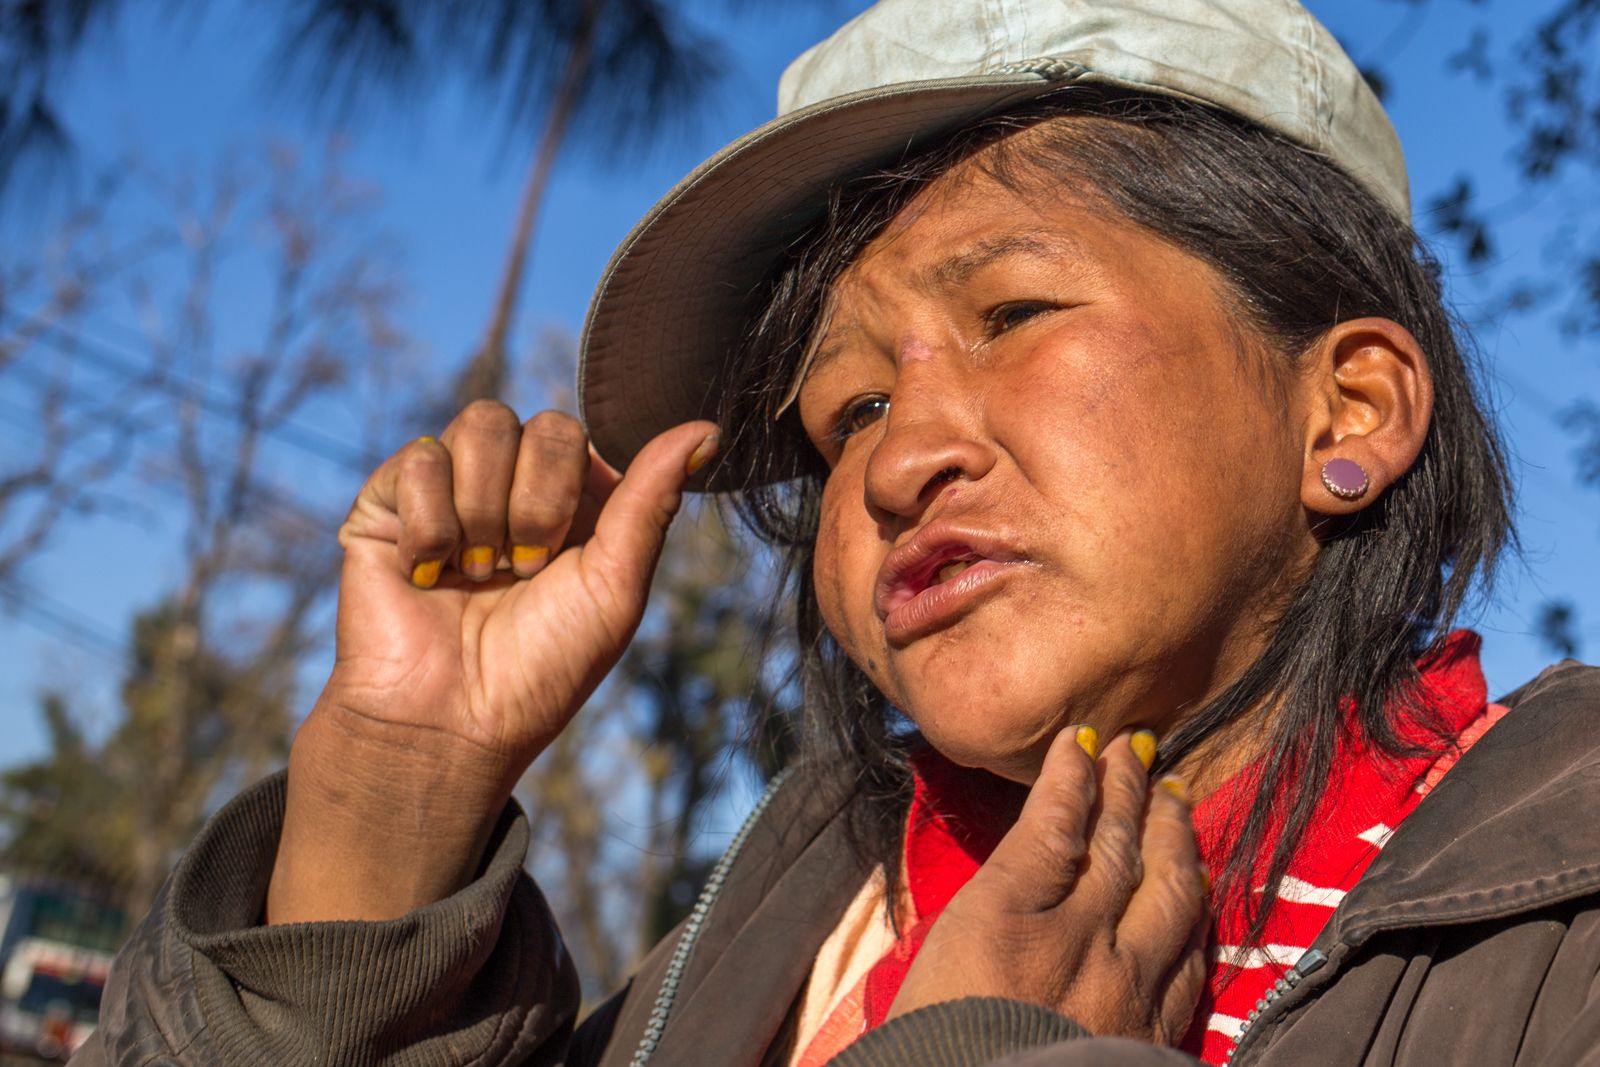 Esmeralda Cespedes, 25, said she doesn't inhale glue. But she drinks alcohol “because of the problems I have in my life. A lot of people bother me.” Image by Tracey Eaton. Bolivia, 2017.